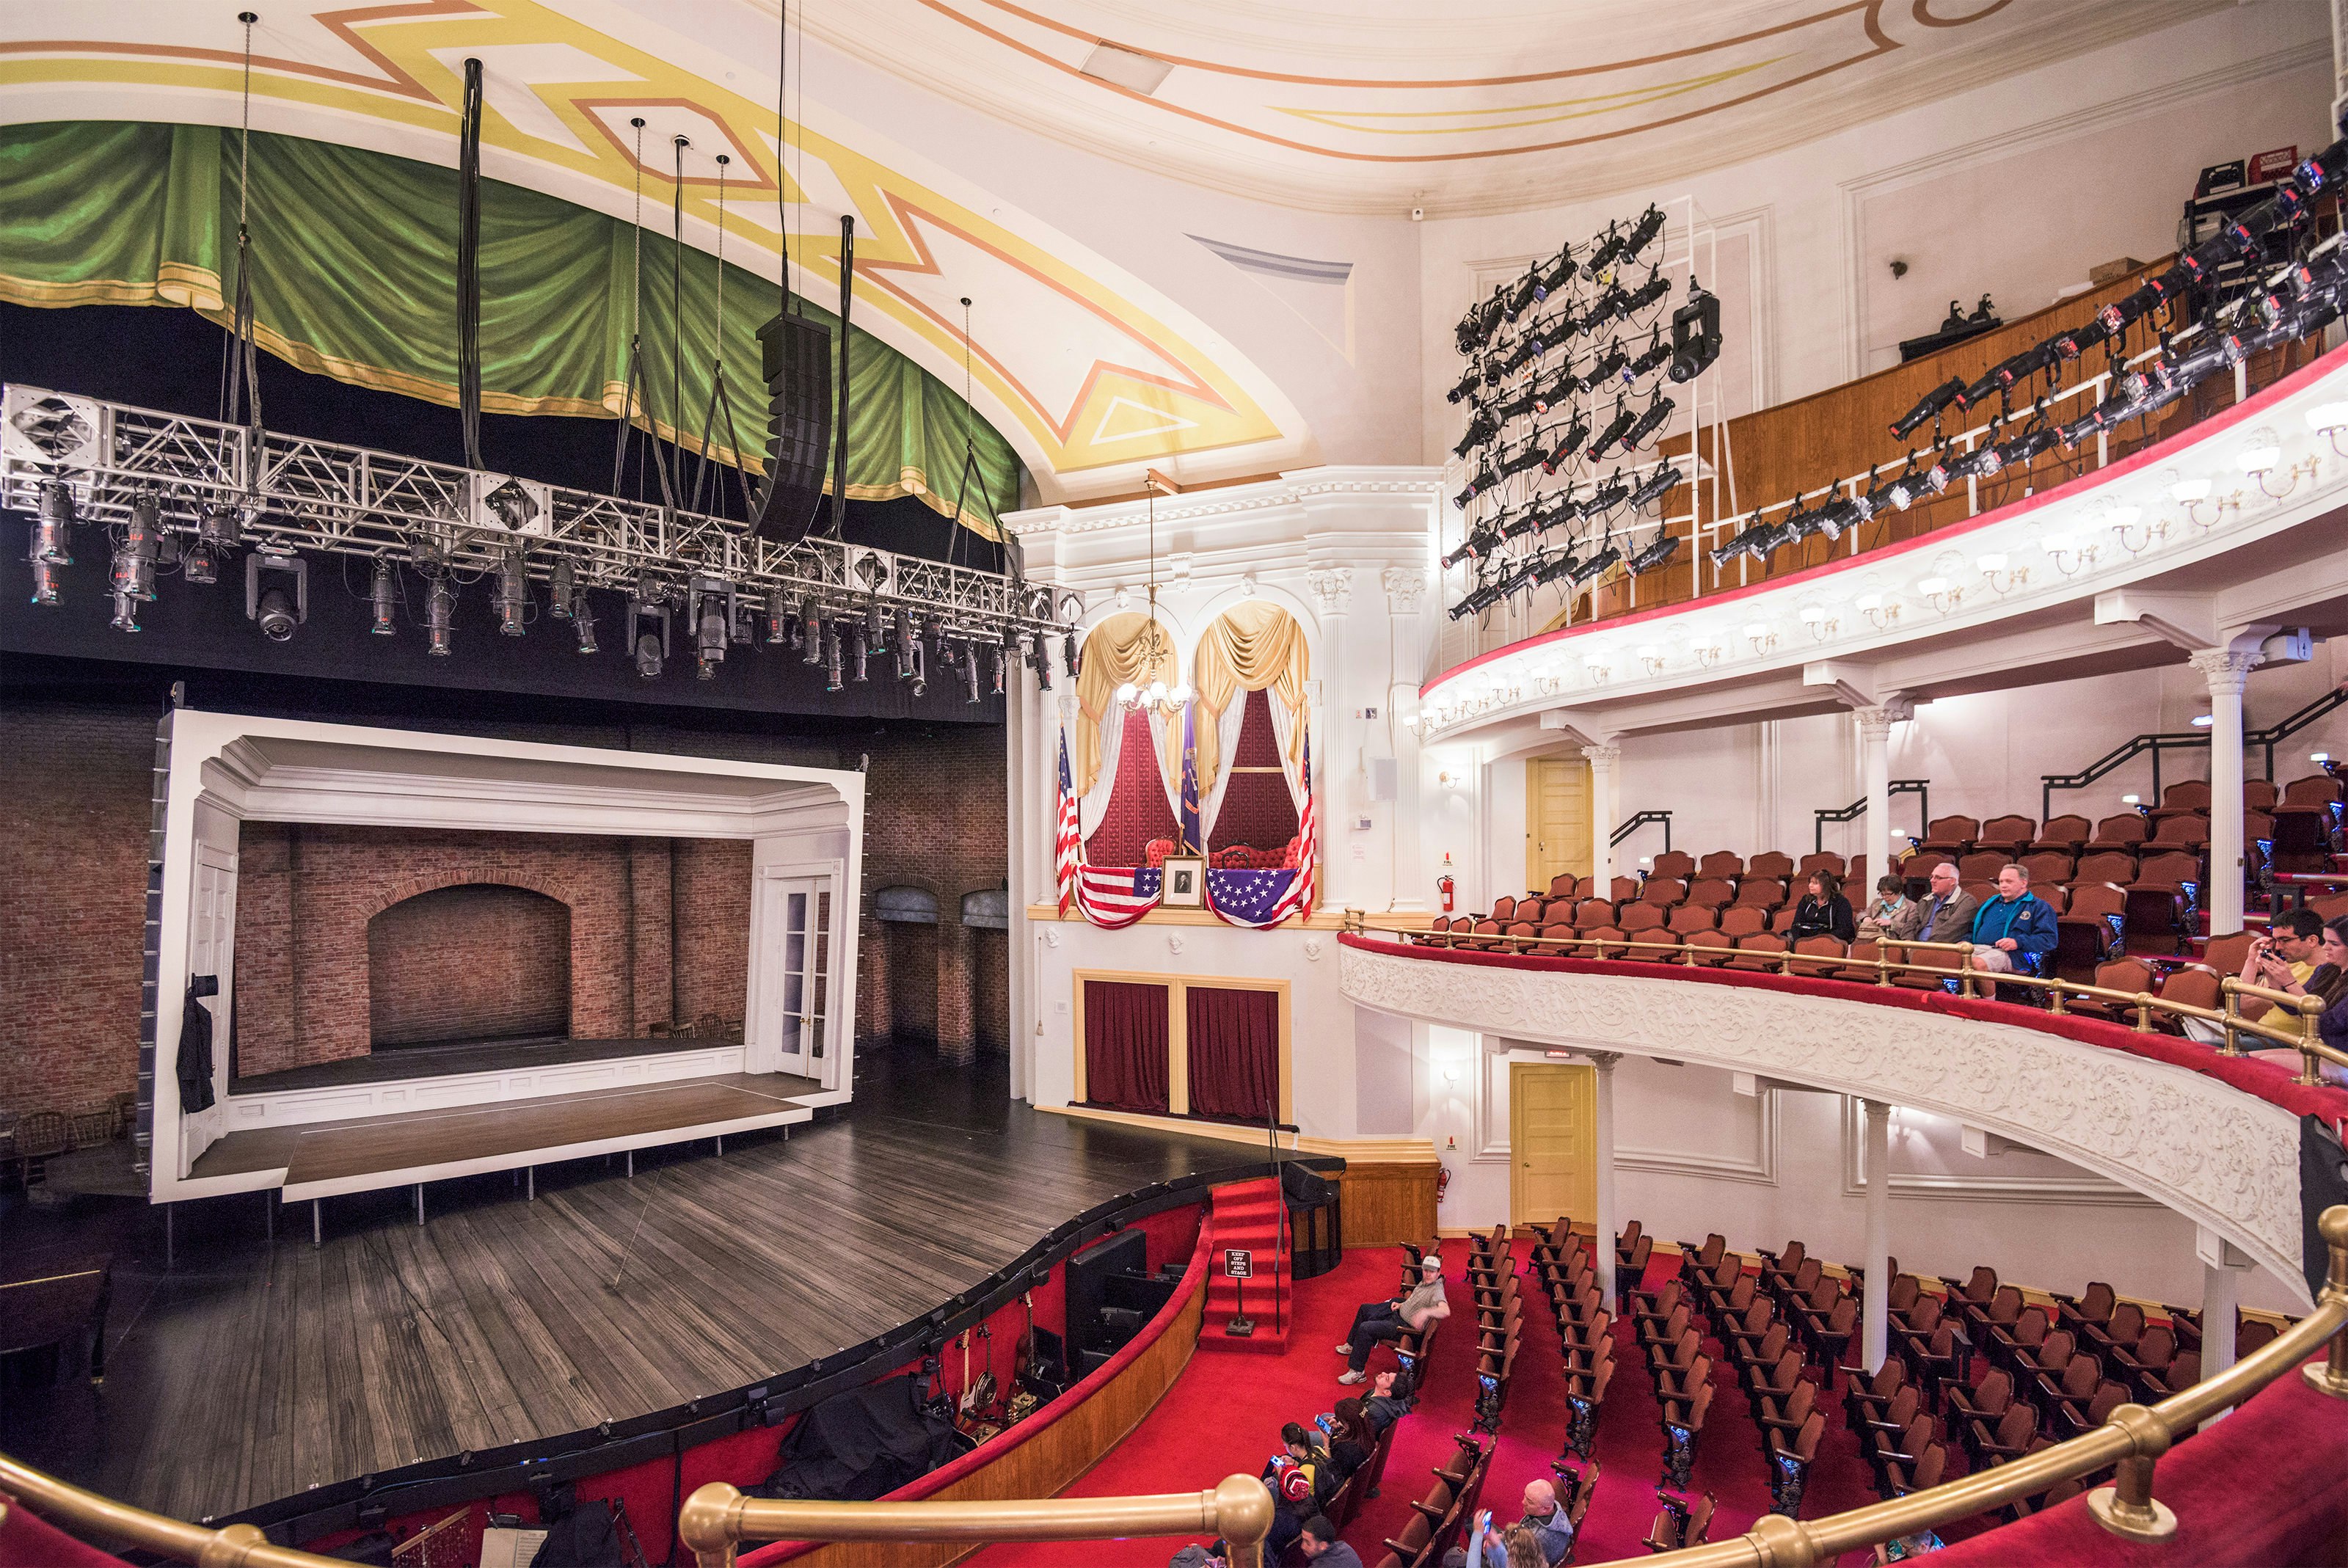 A multi-storied 19th century theater with red seats